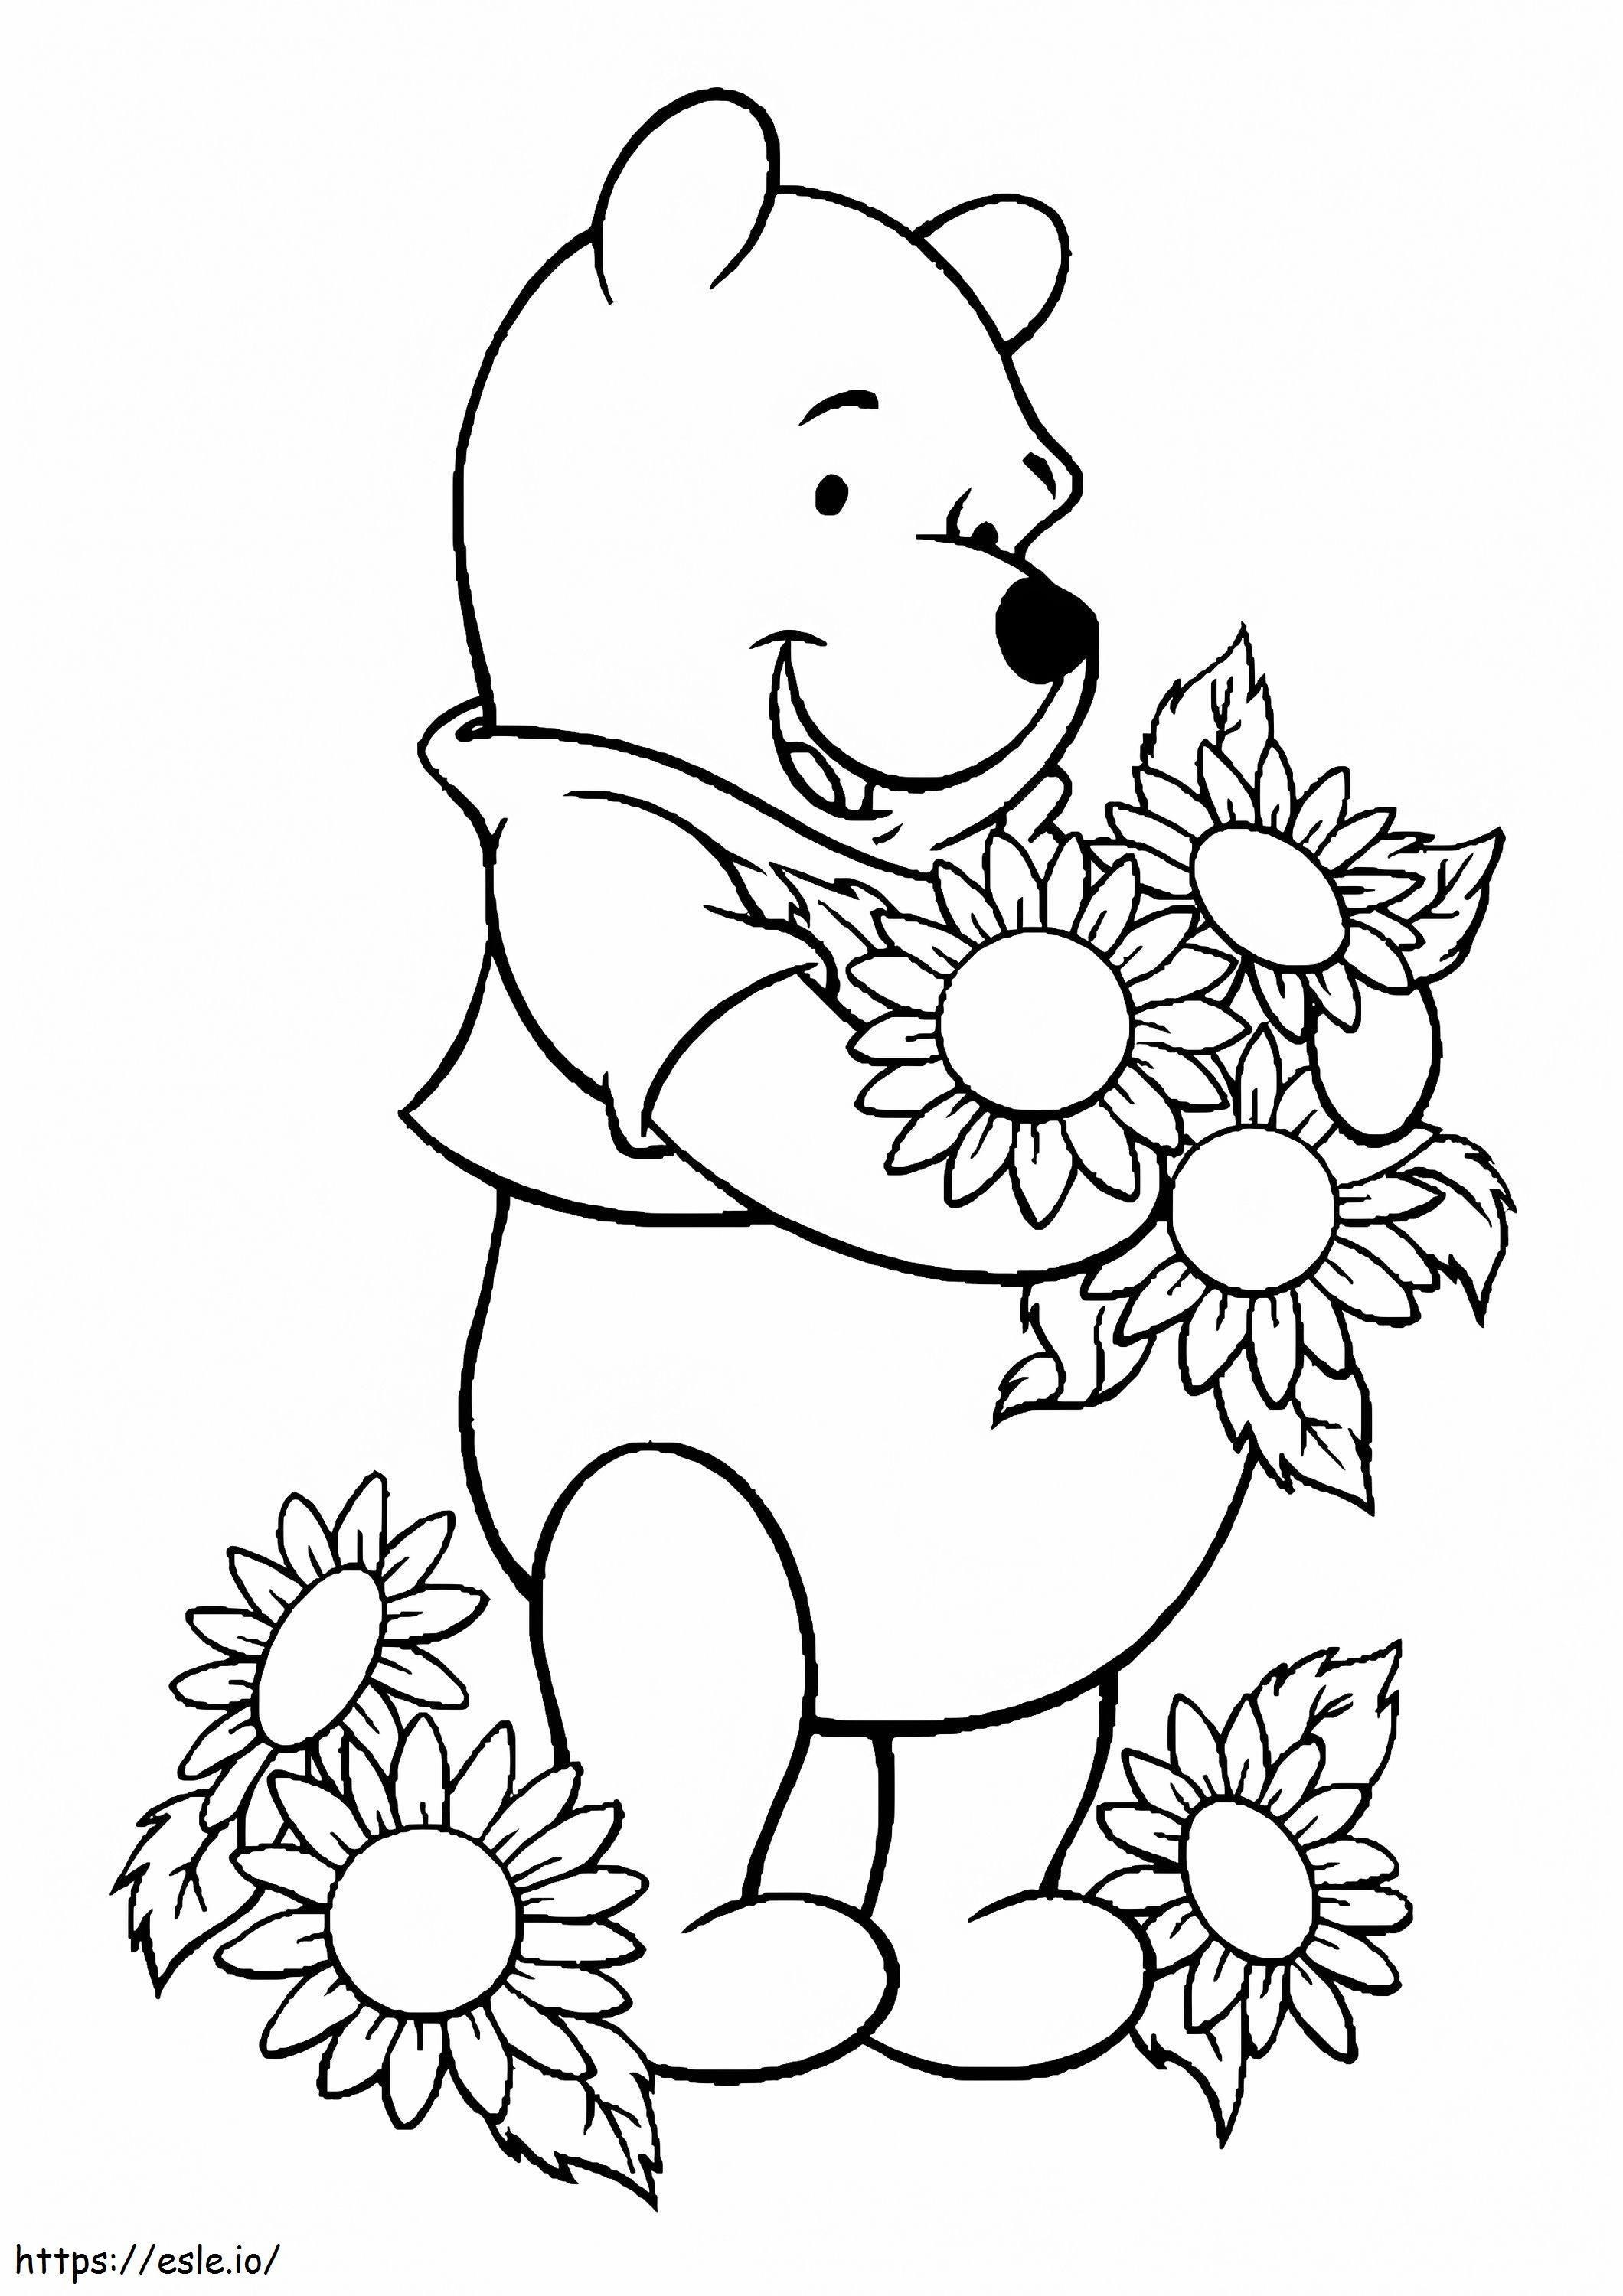 1526549763 The Pooh Loves Flowers1 A4 coloring page